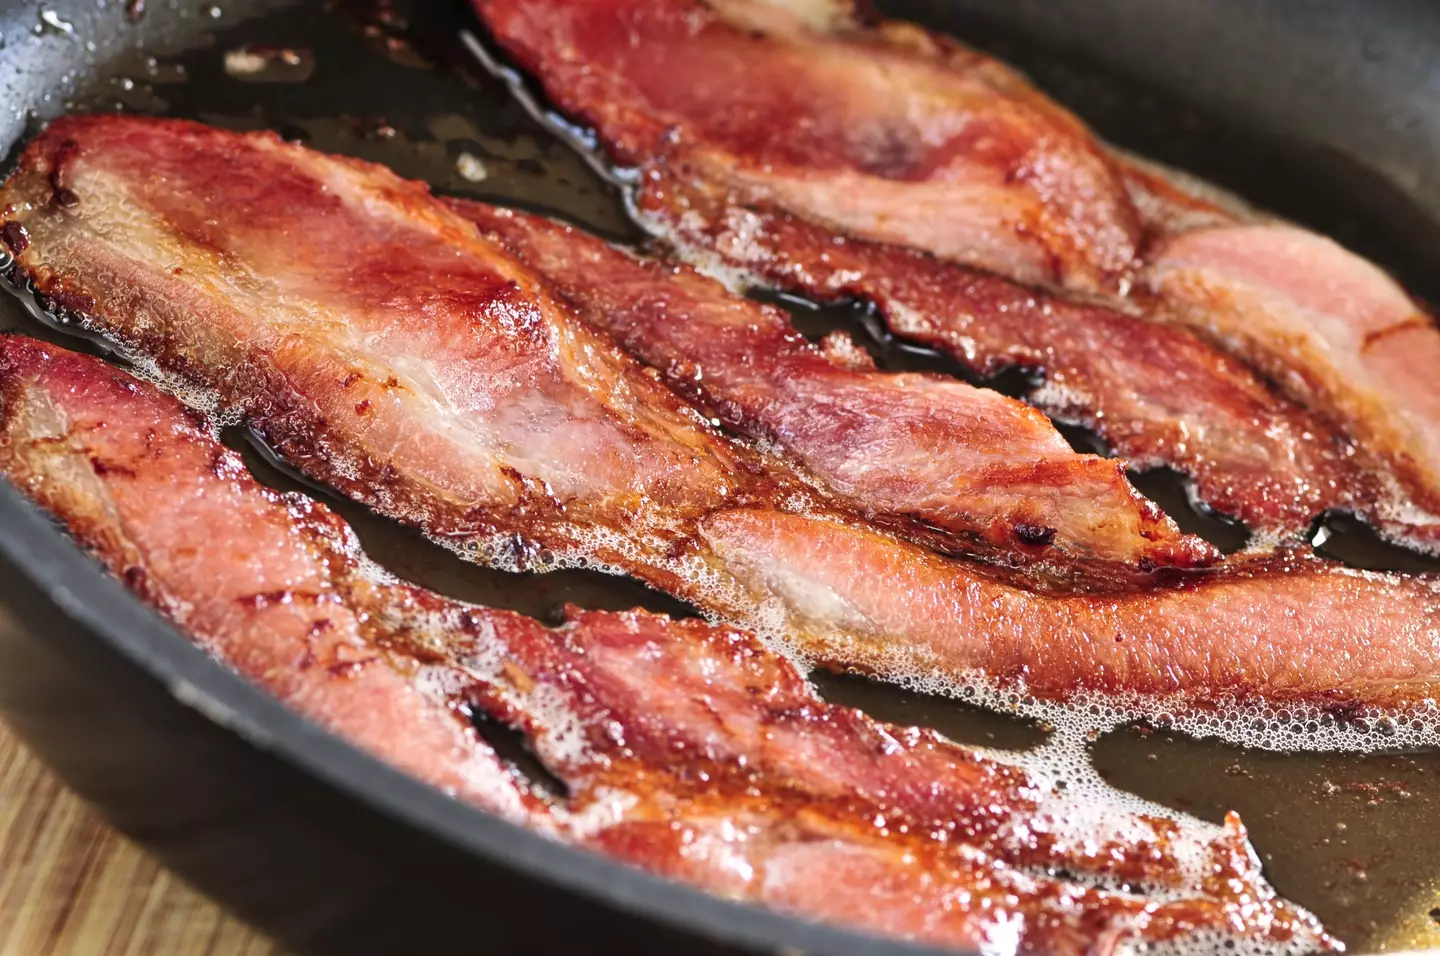 The parent explained they often cook bacon for breakfast (